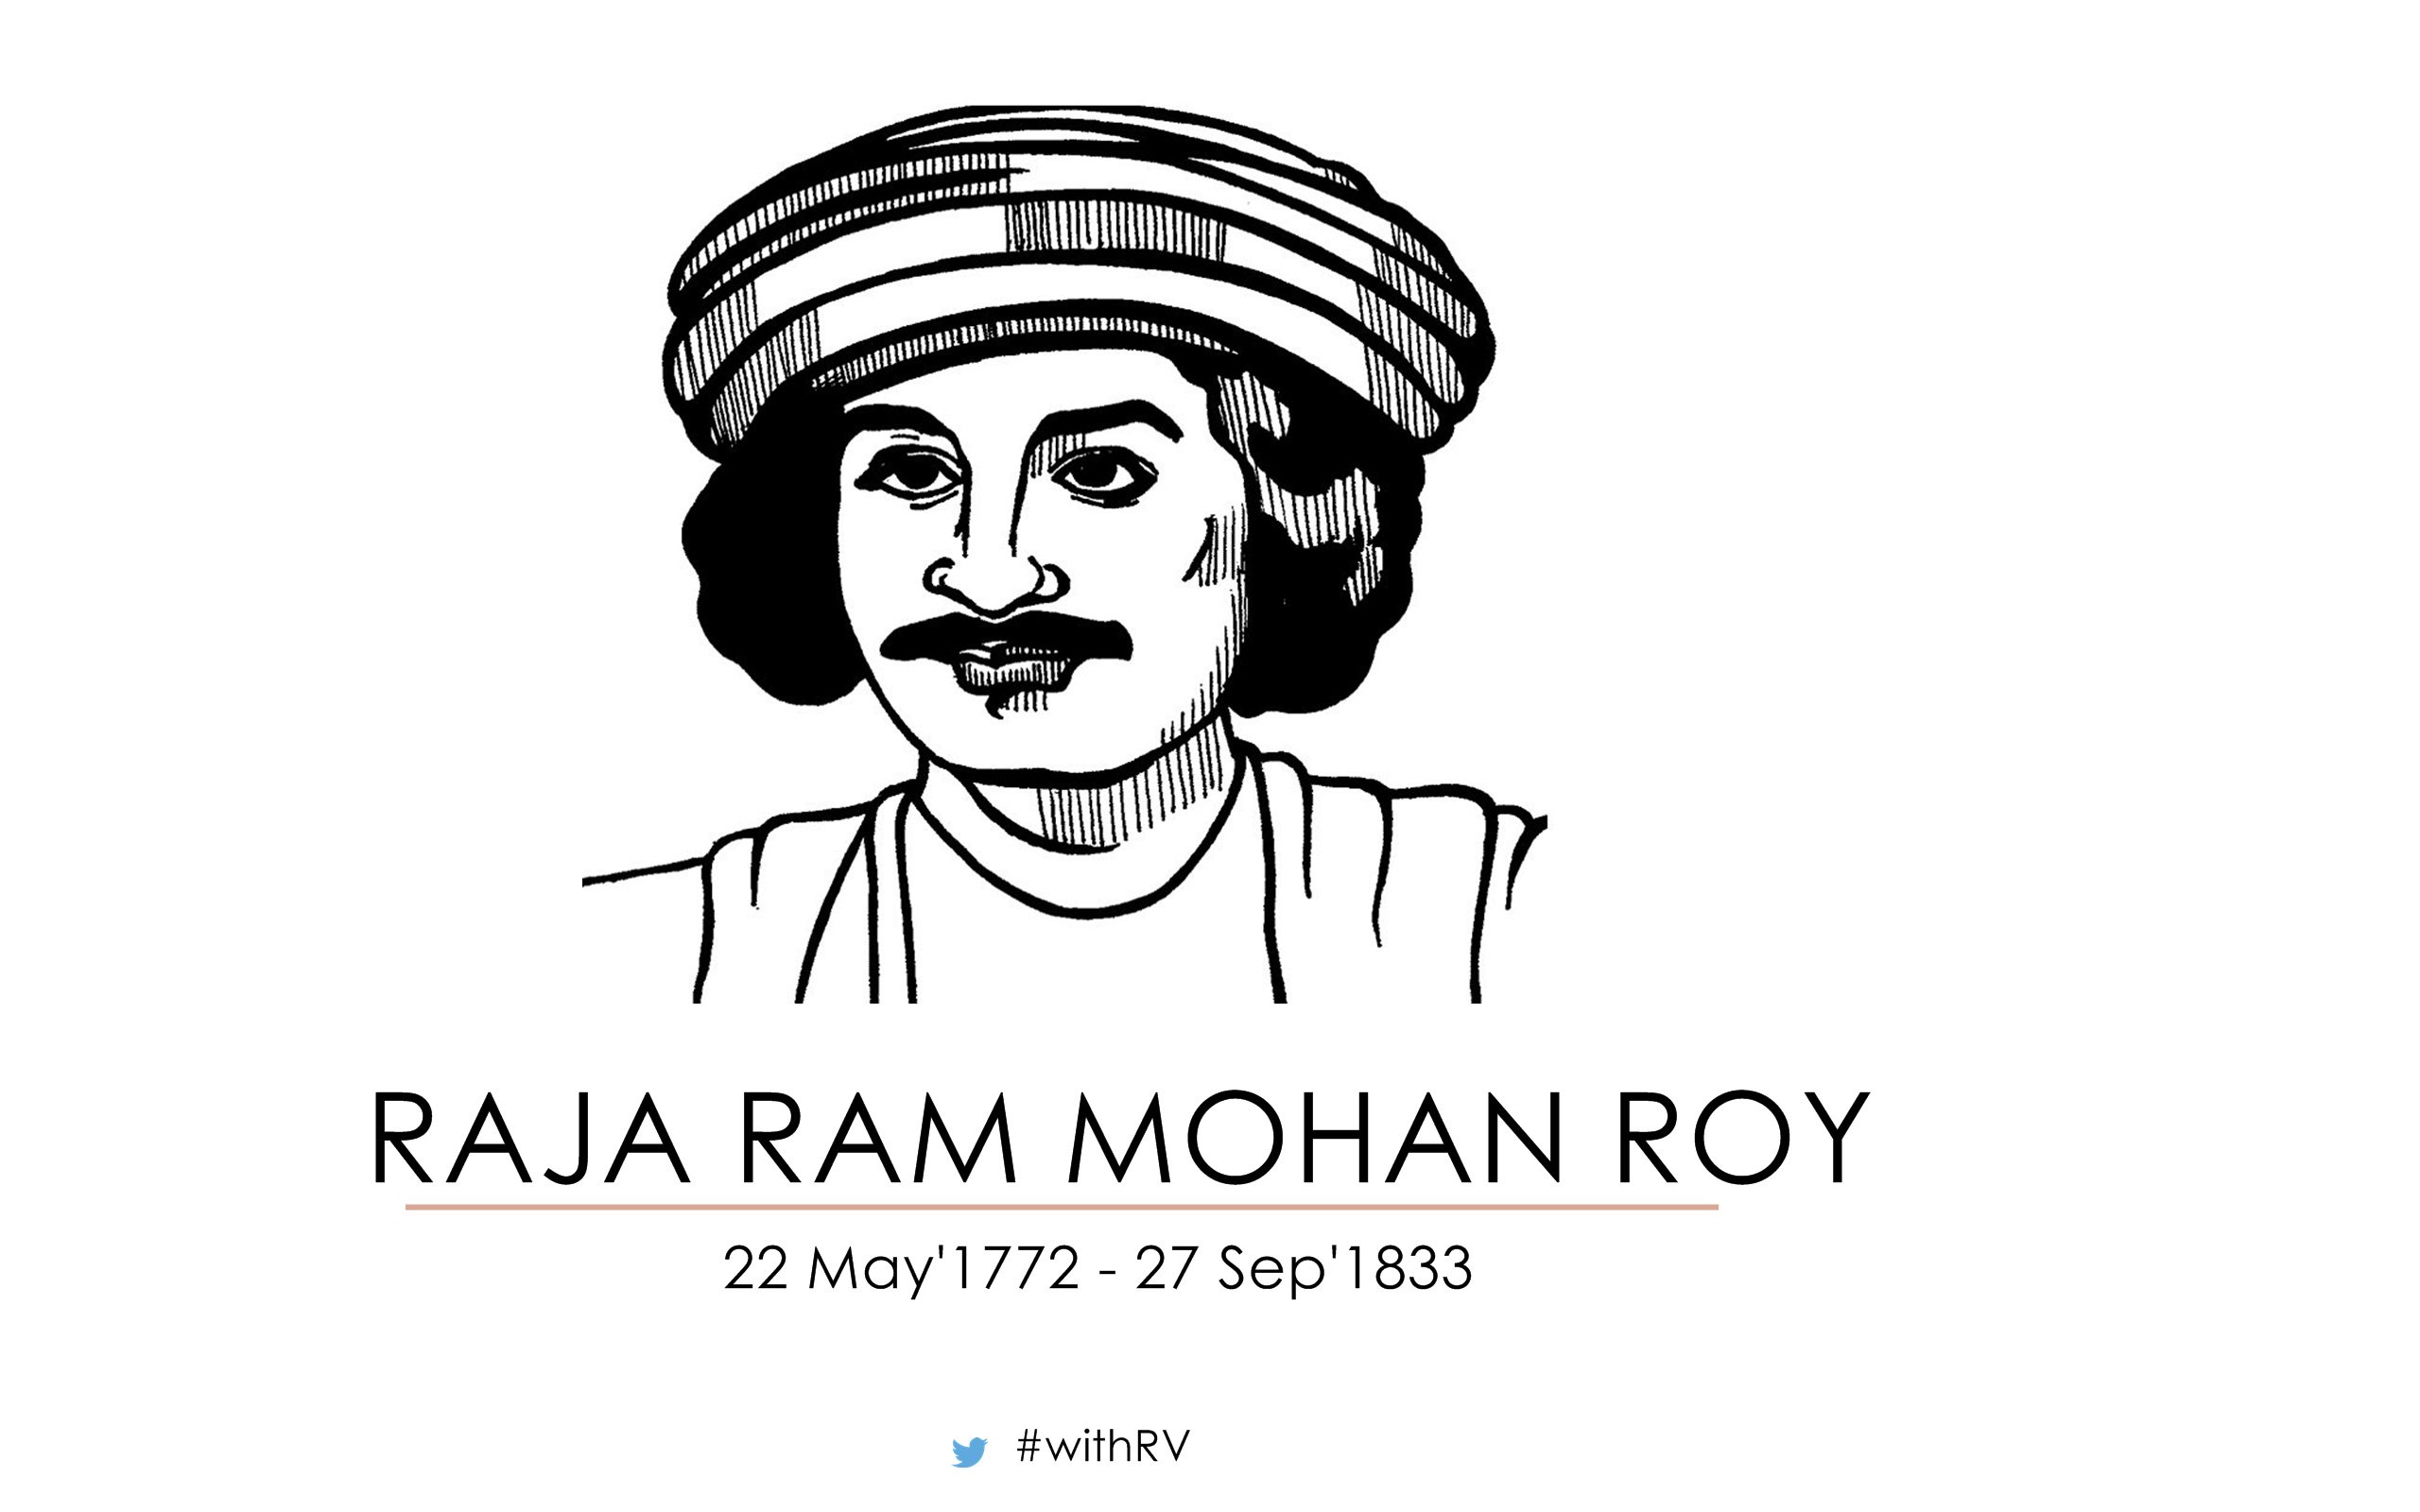 With Robert Vadra Mohan Roy Was A Founder Of The Brahma Sabha In Which Engendered The Brahmo Samaj, An Influential Social Religious Reform Movement.His Influence Was Apparent In